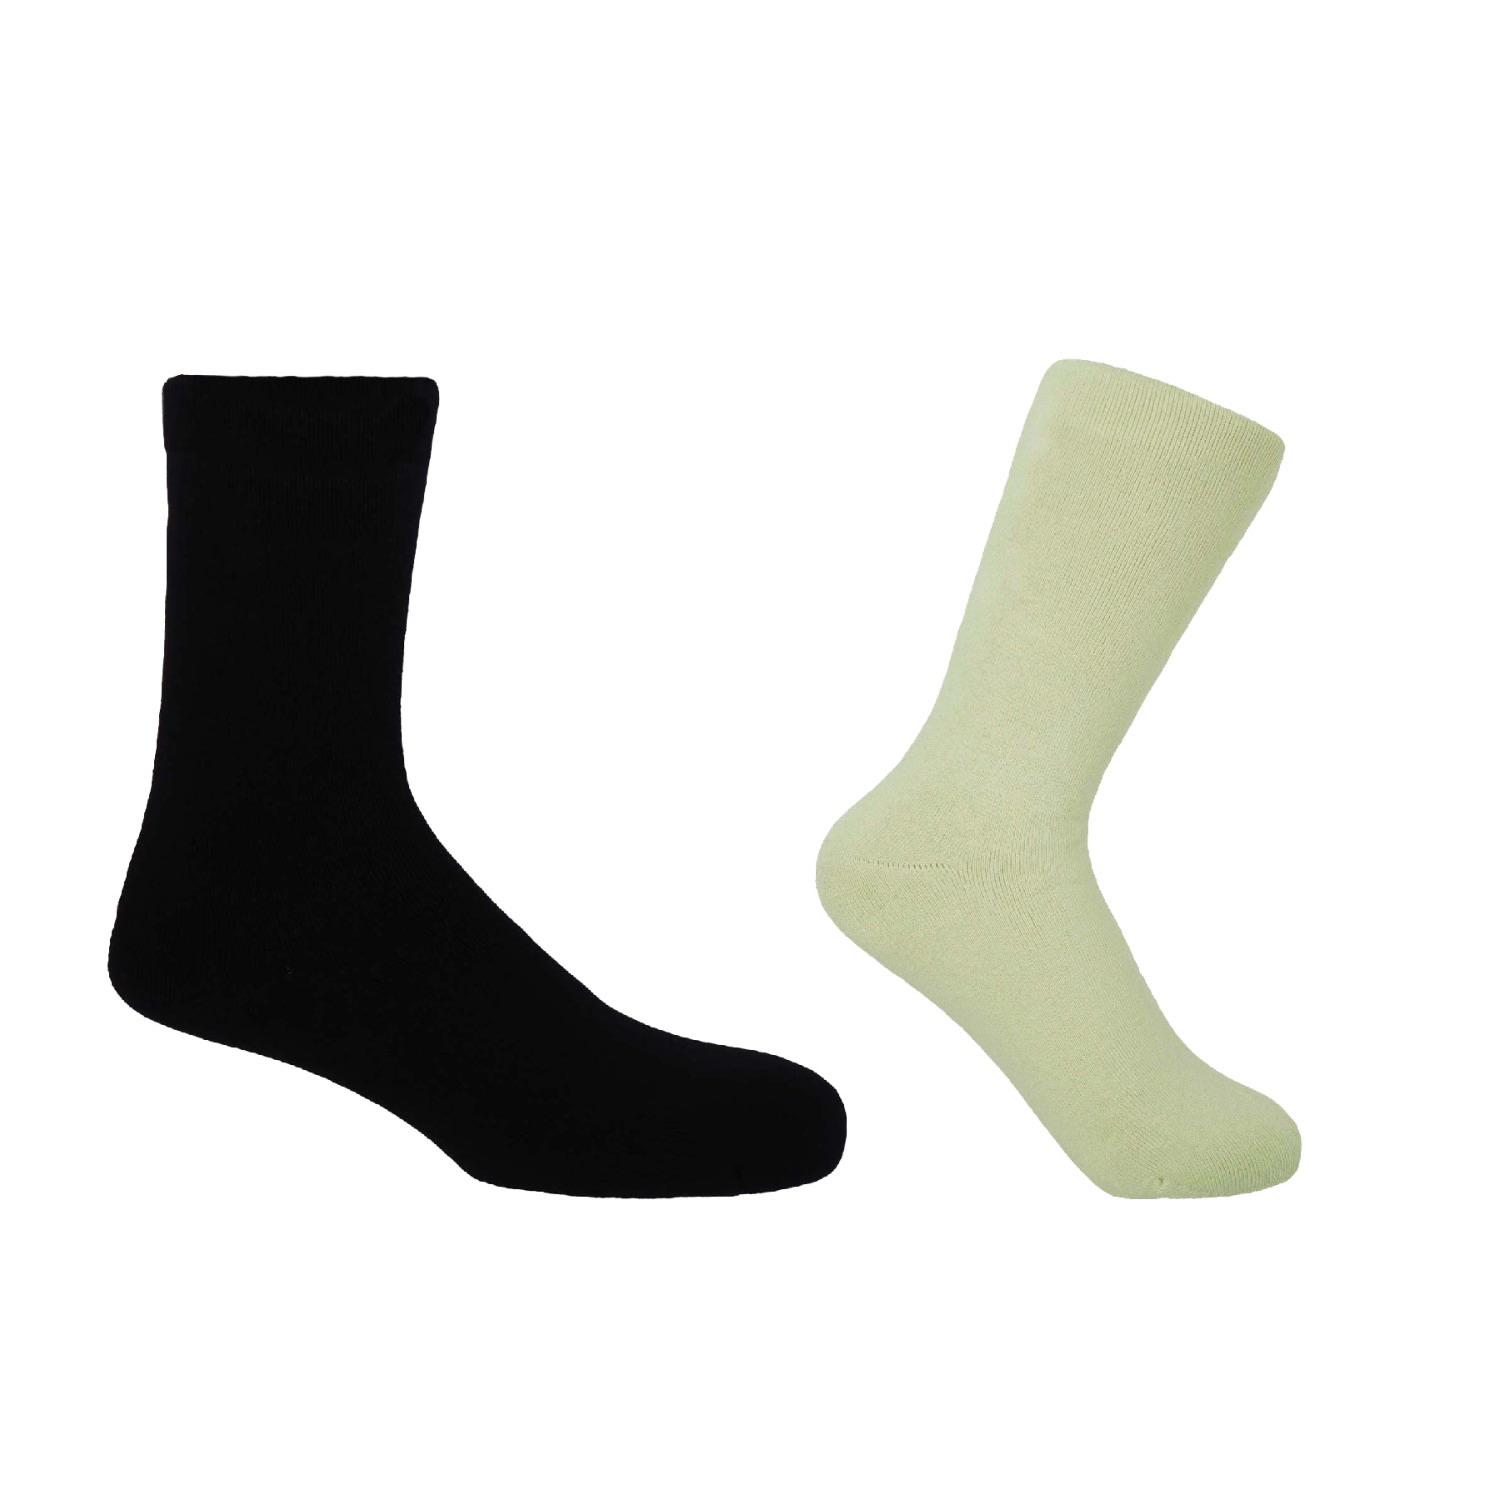 Men’s Black / Neutrals His And Hers Plain Bed Socks - Black & Cream One Size Peper Harow - Made in England